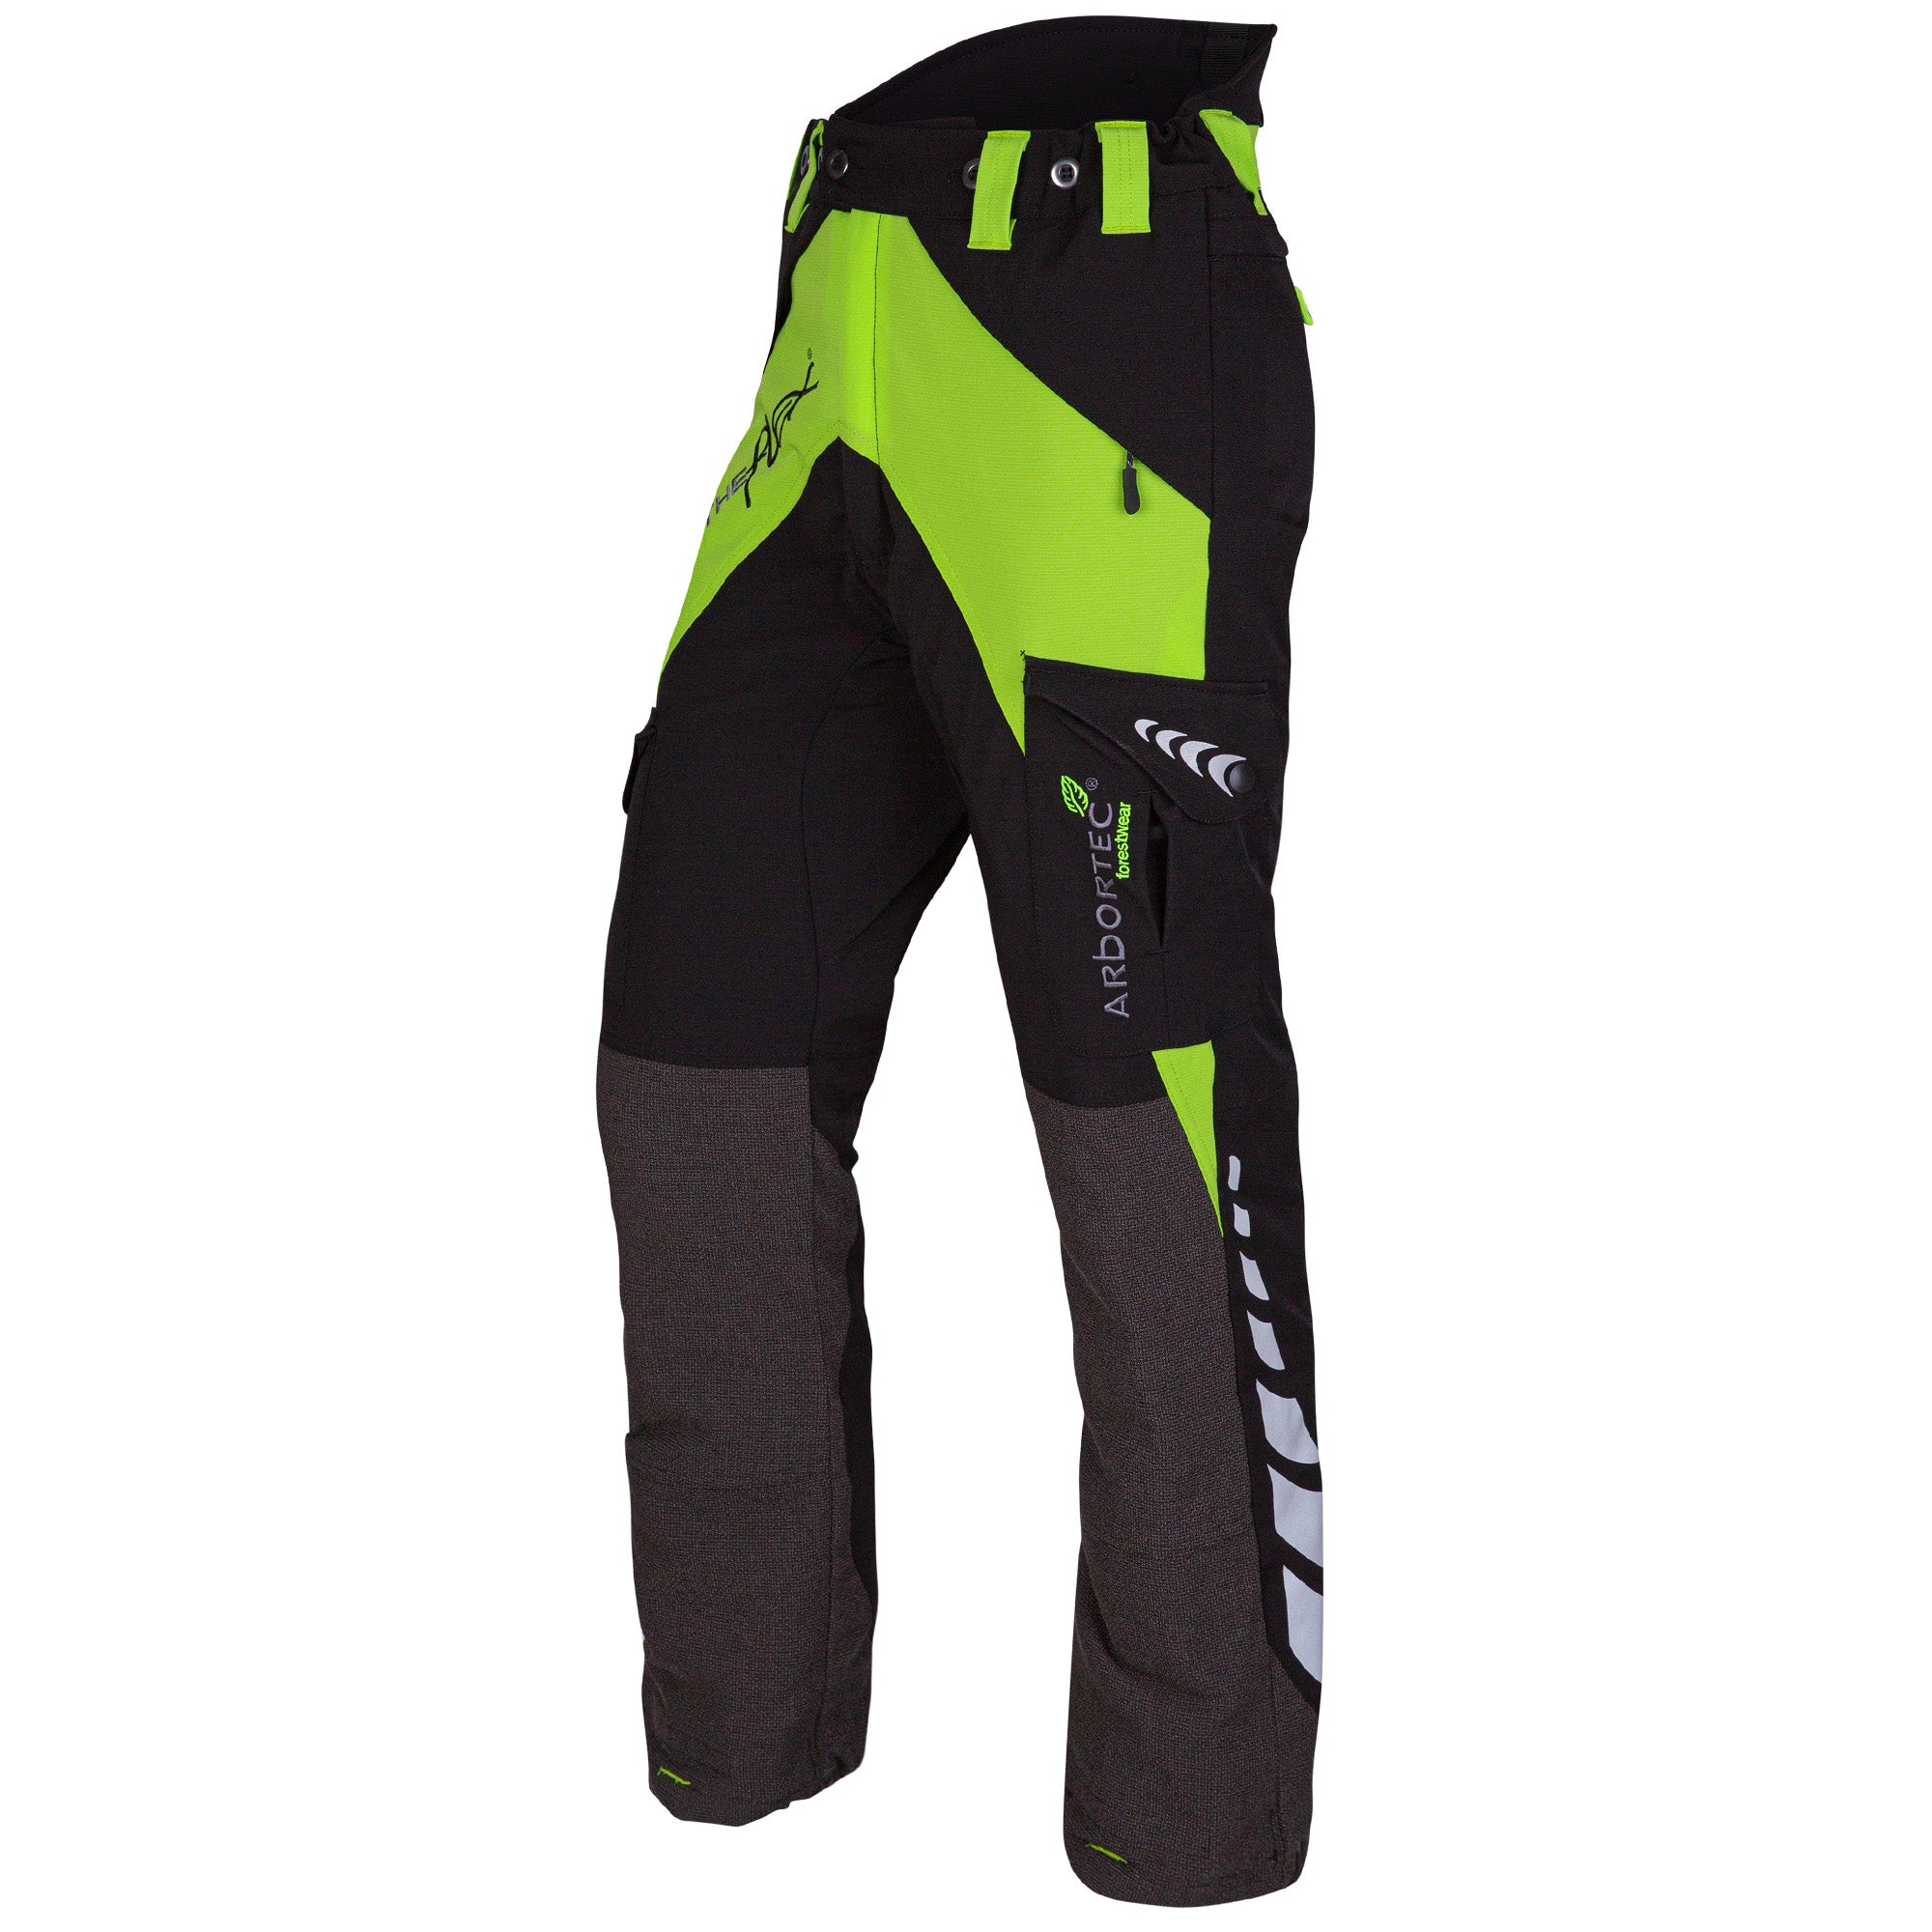 AT4050 - Trouser Breatheflex Lime Type C/Class 1